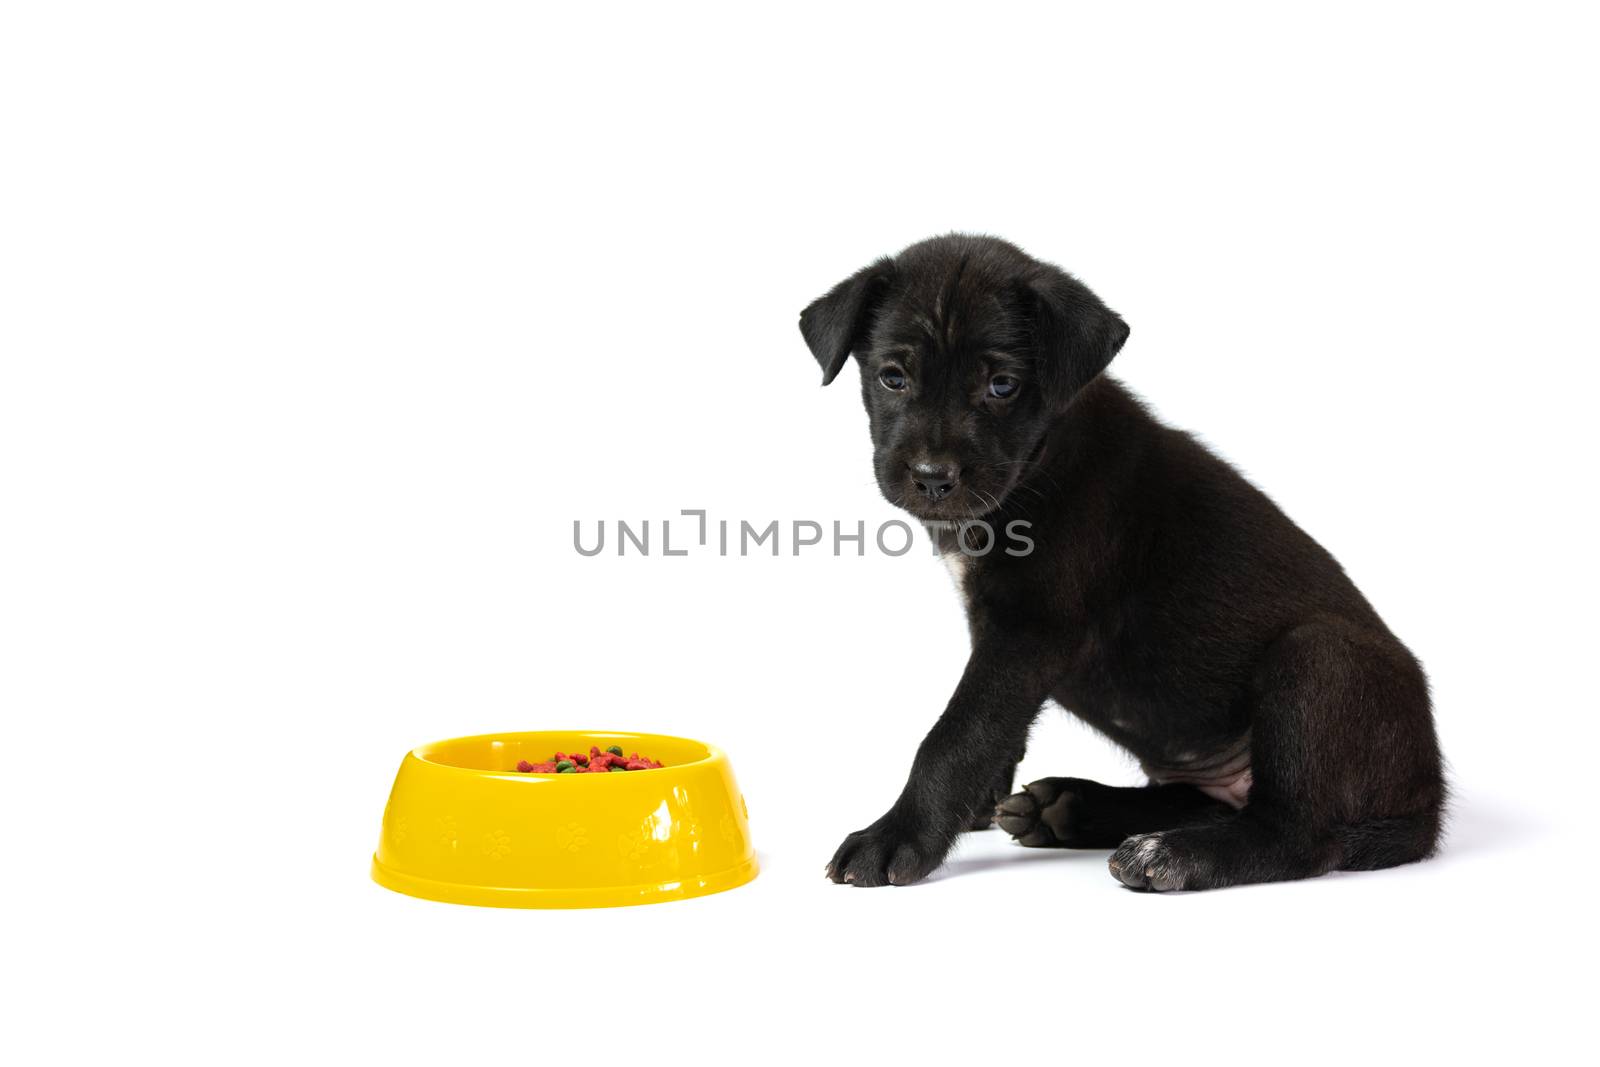 Cute small dog with bowl of dog food isolated on white backgroun by kirisa99